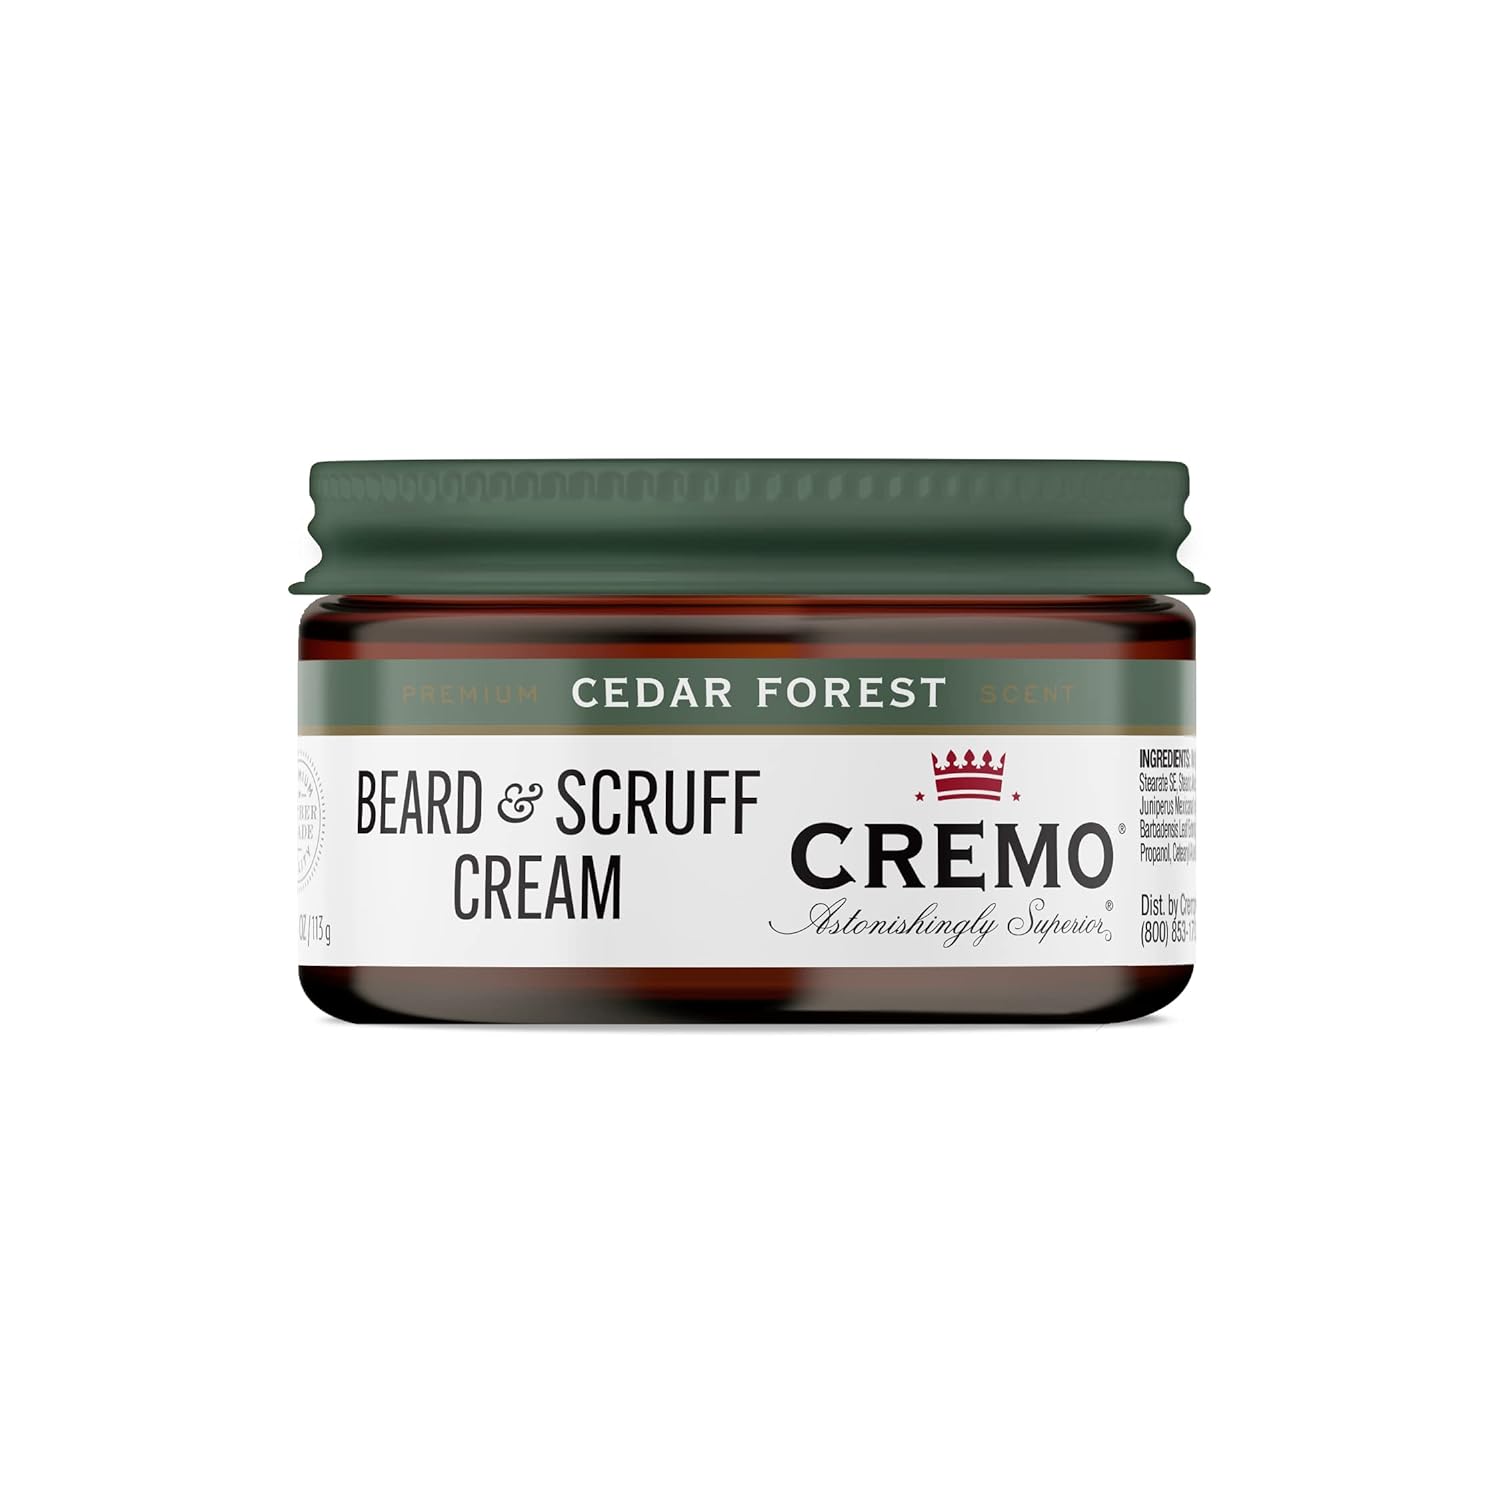 Cremo Beard & Scruff Cream, Cedar Forest, 4 oz - Soothe Beard Itch, Condition and Offer Light-Hold Styling for Stubble and Scruff (Product Packaging May Vary) : Beauty & Personal Care